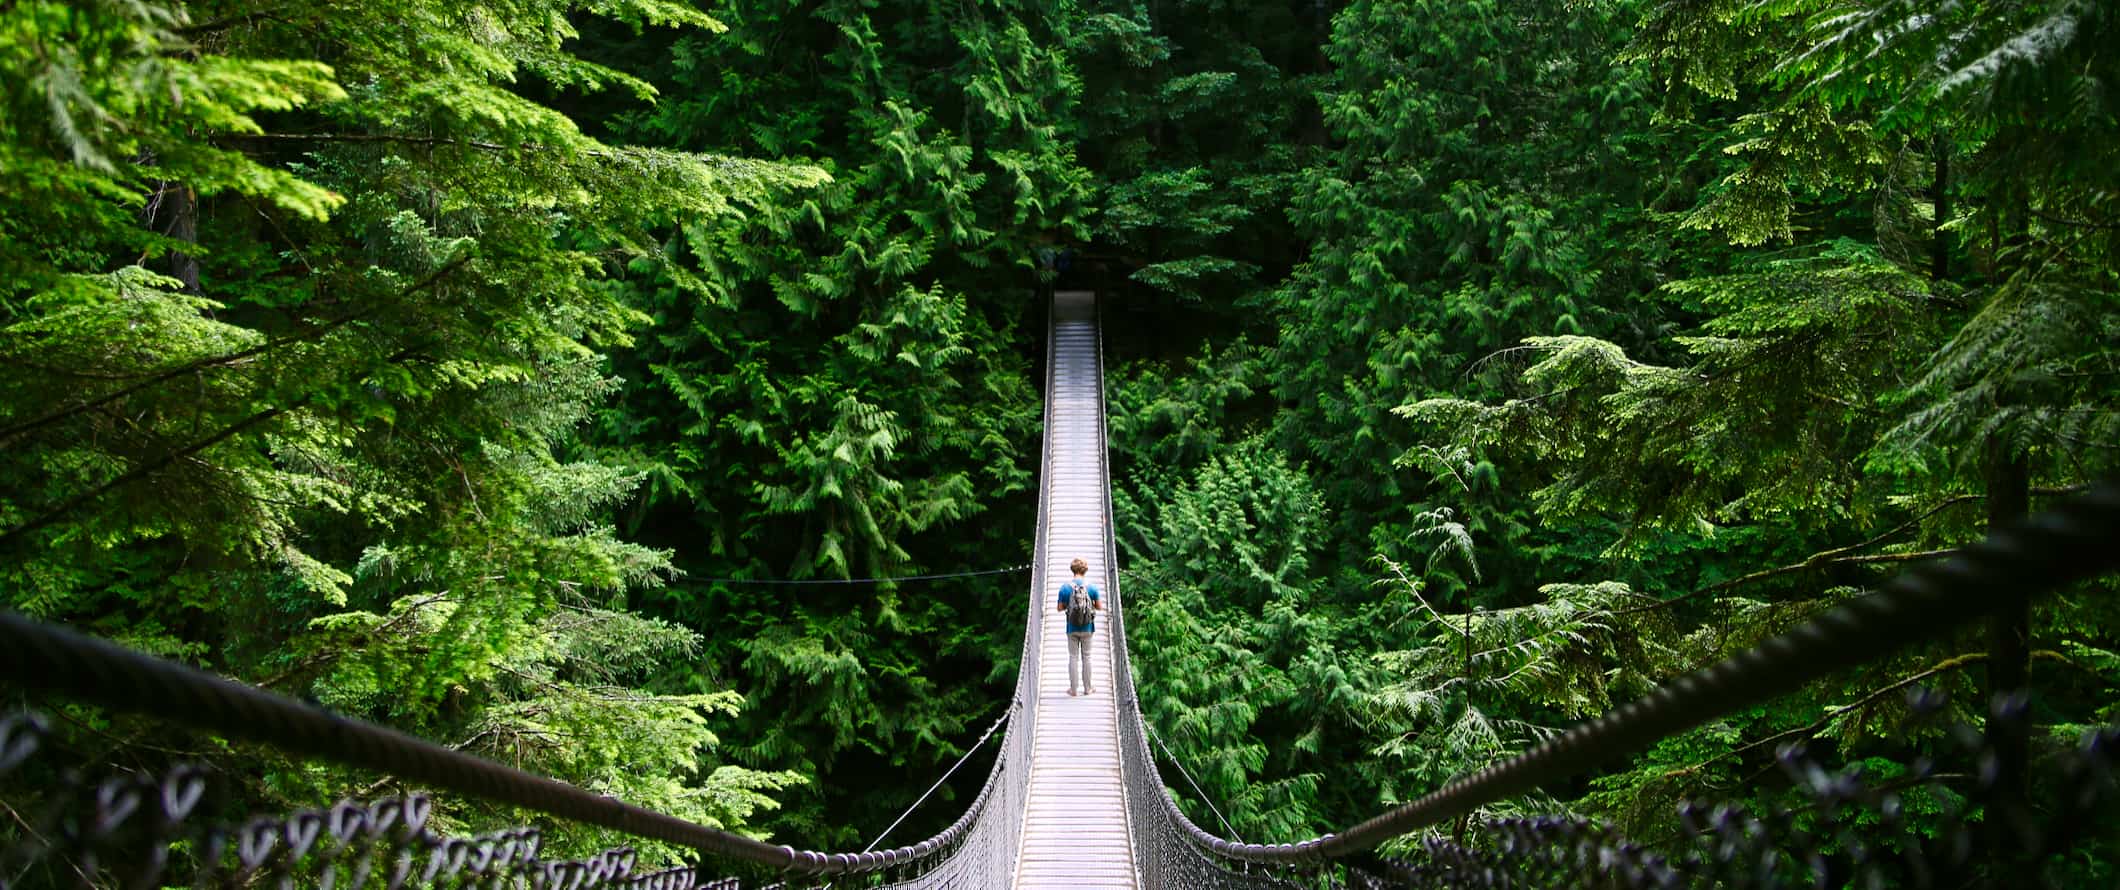 A lone traveler crossing the iconic Capilano Suspension Bridge in the forest near Vancouver, Canada